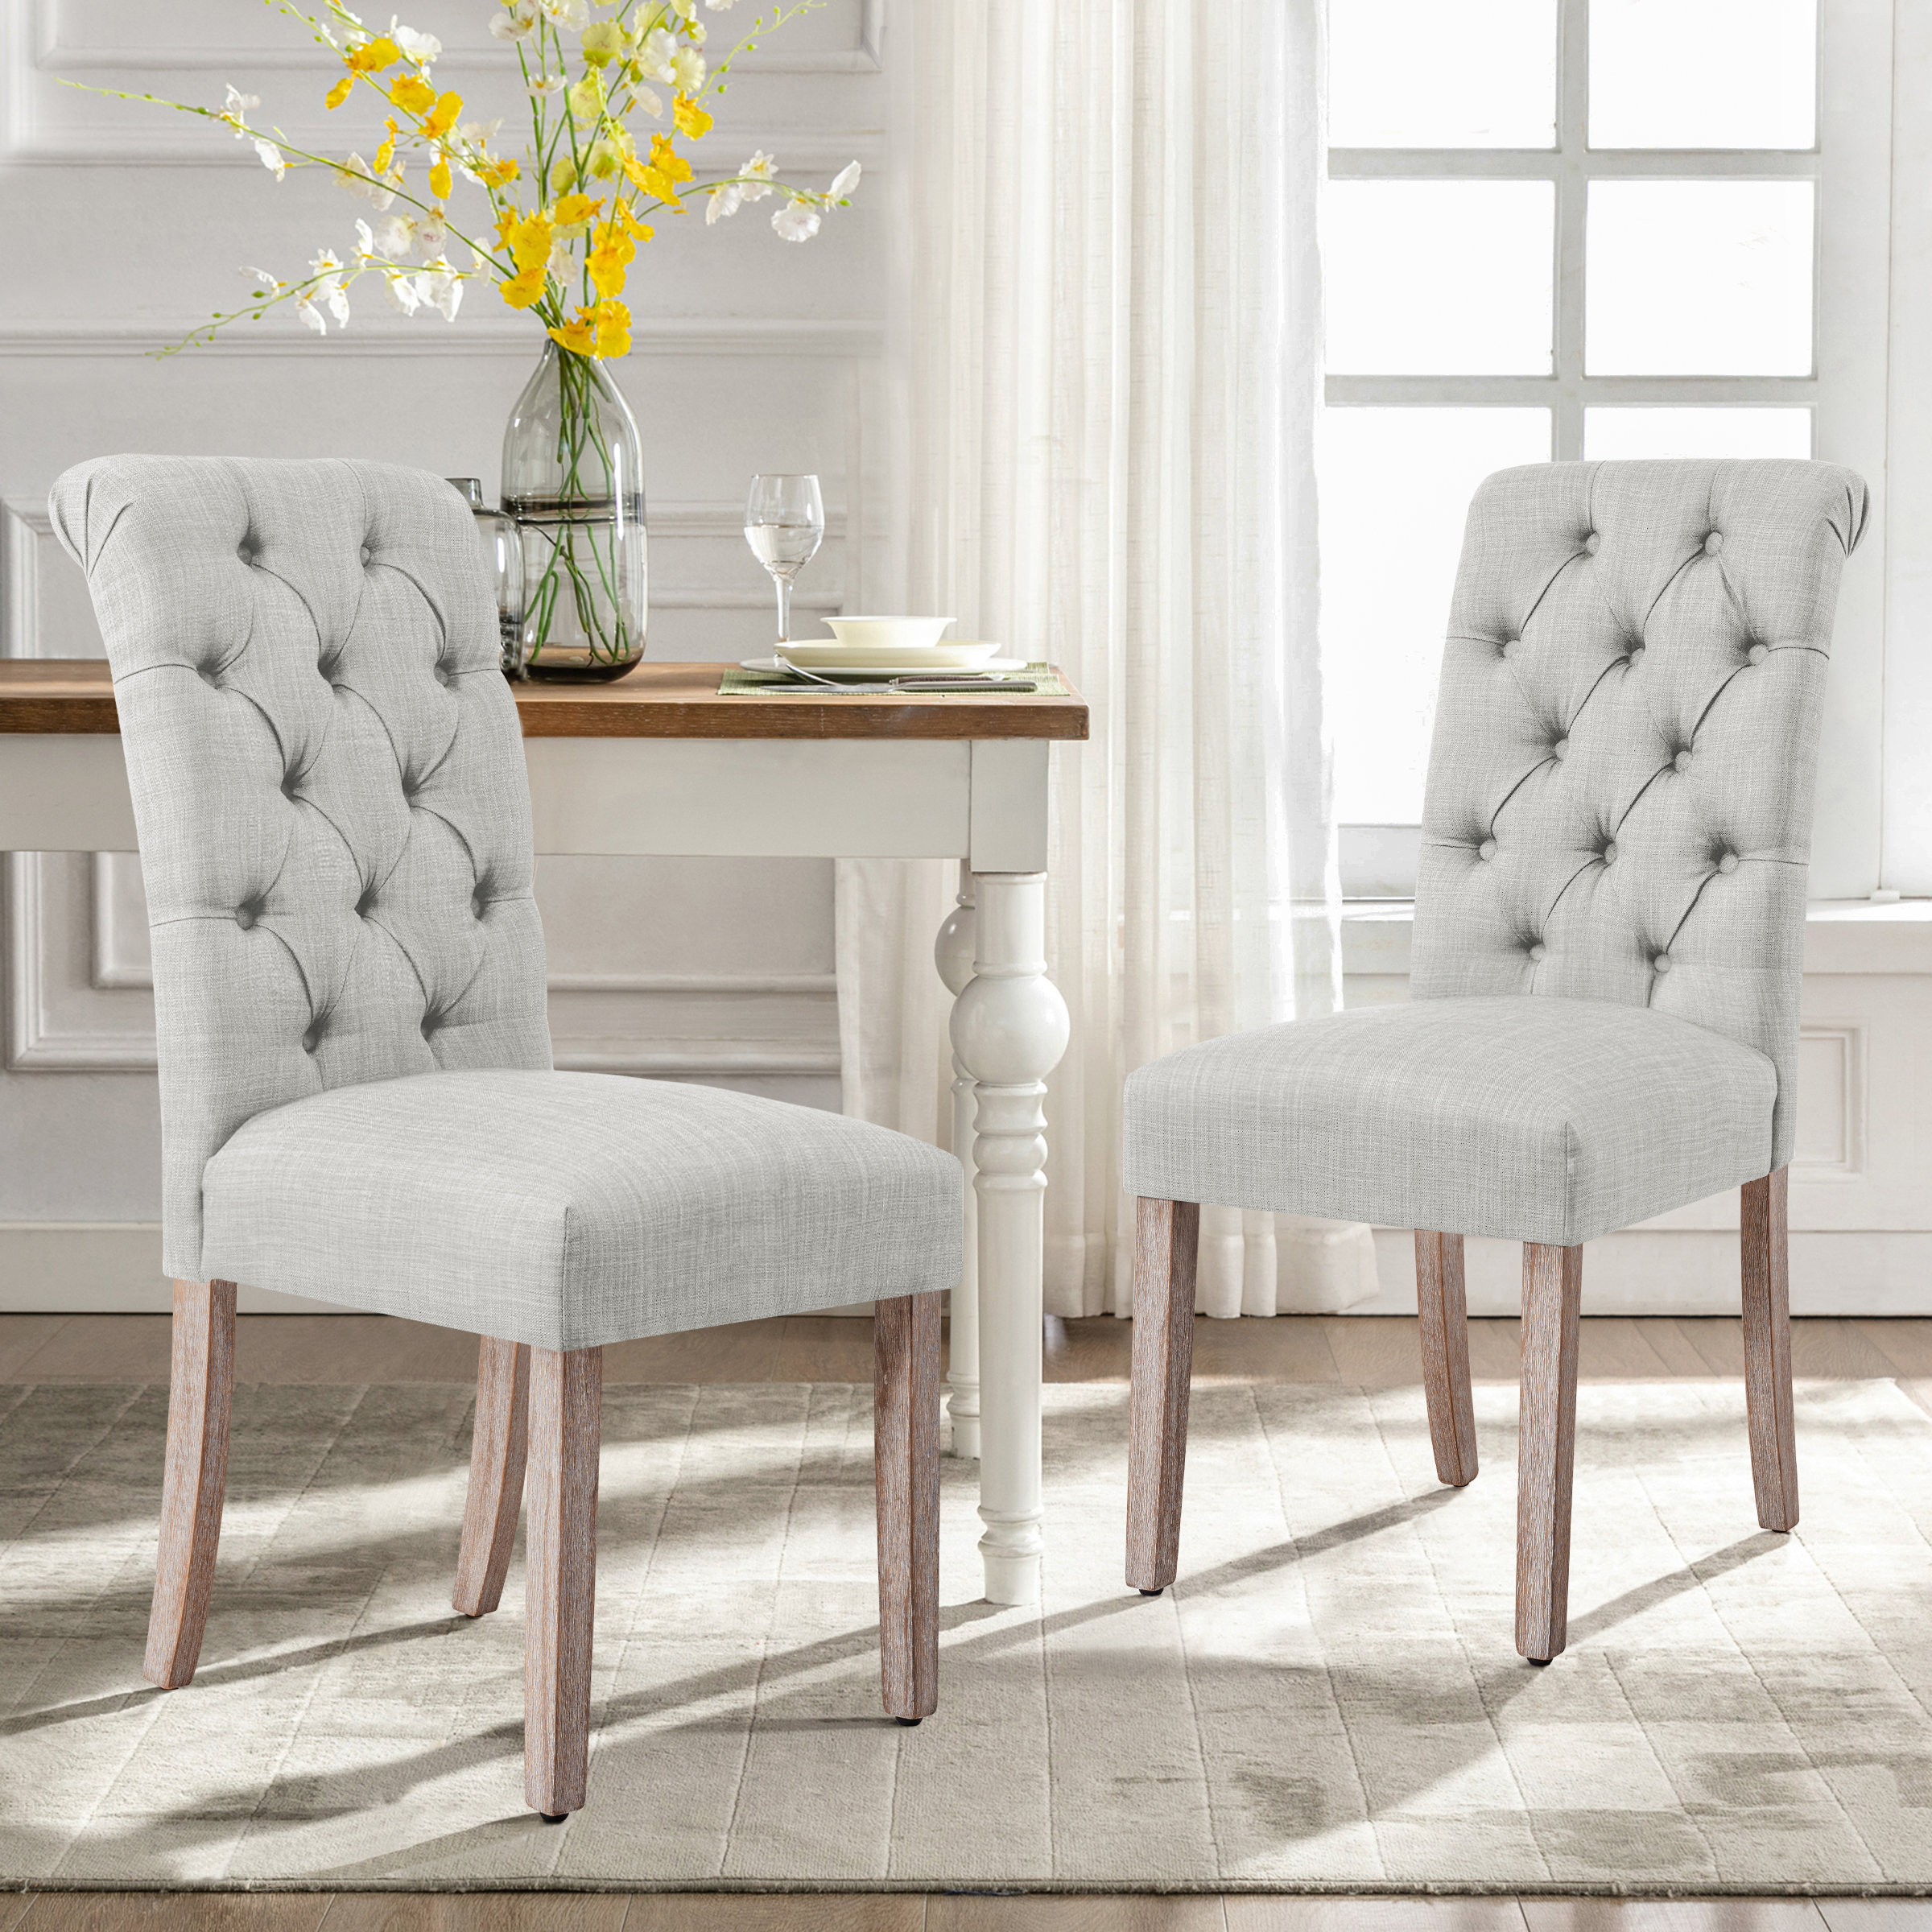 SET OF TWO High Back Tufted Parsons Upholstered Padded Dining Room